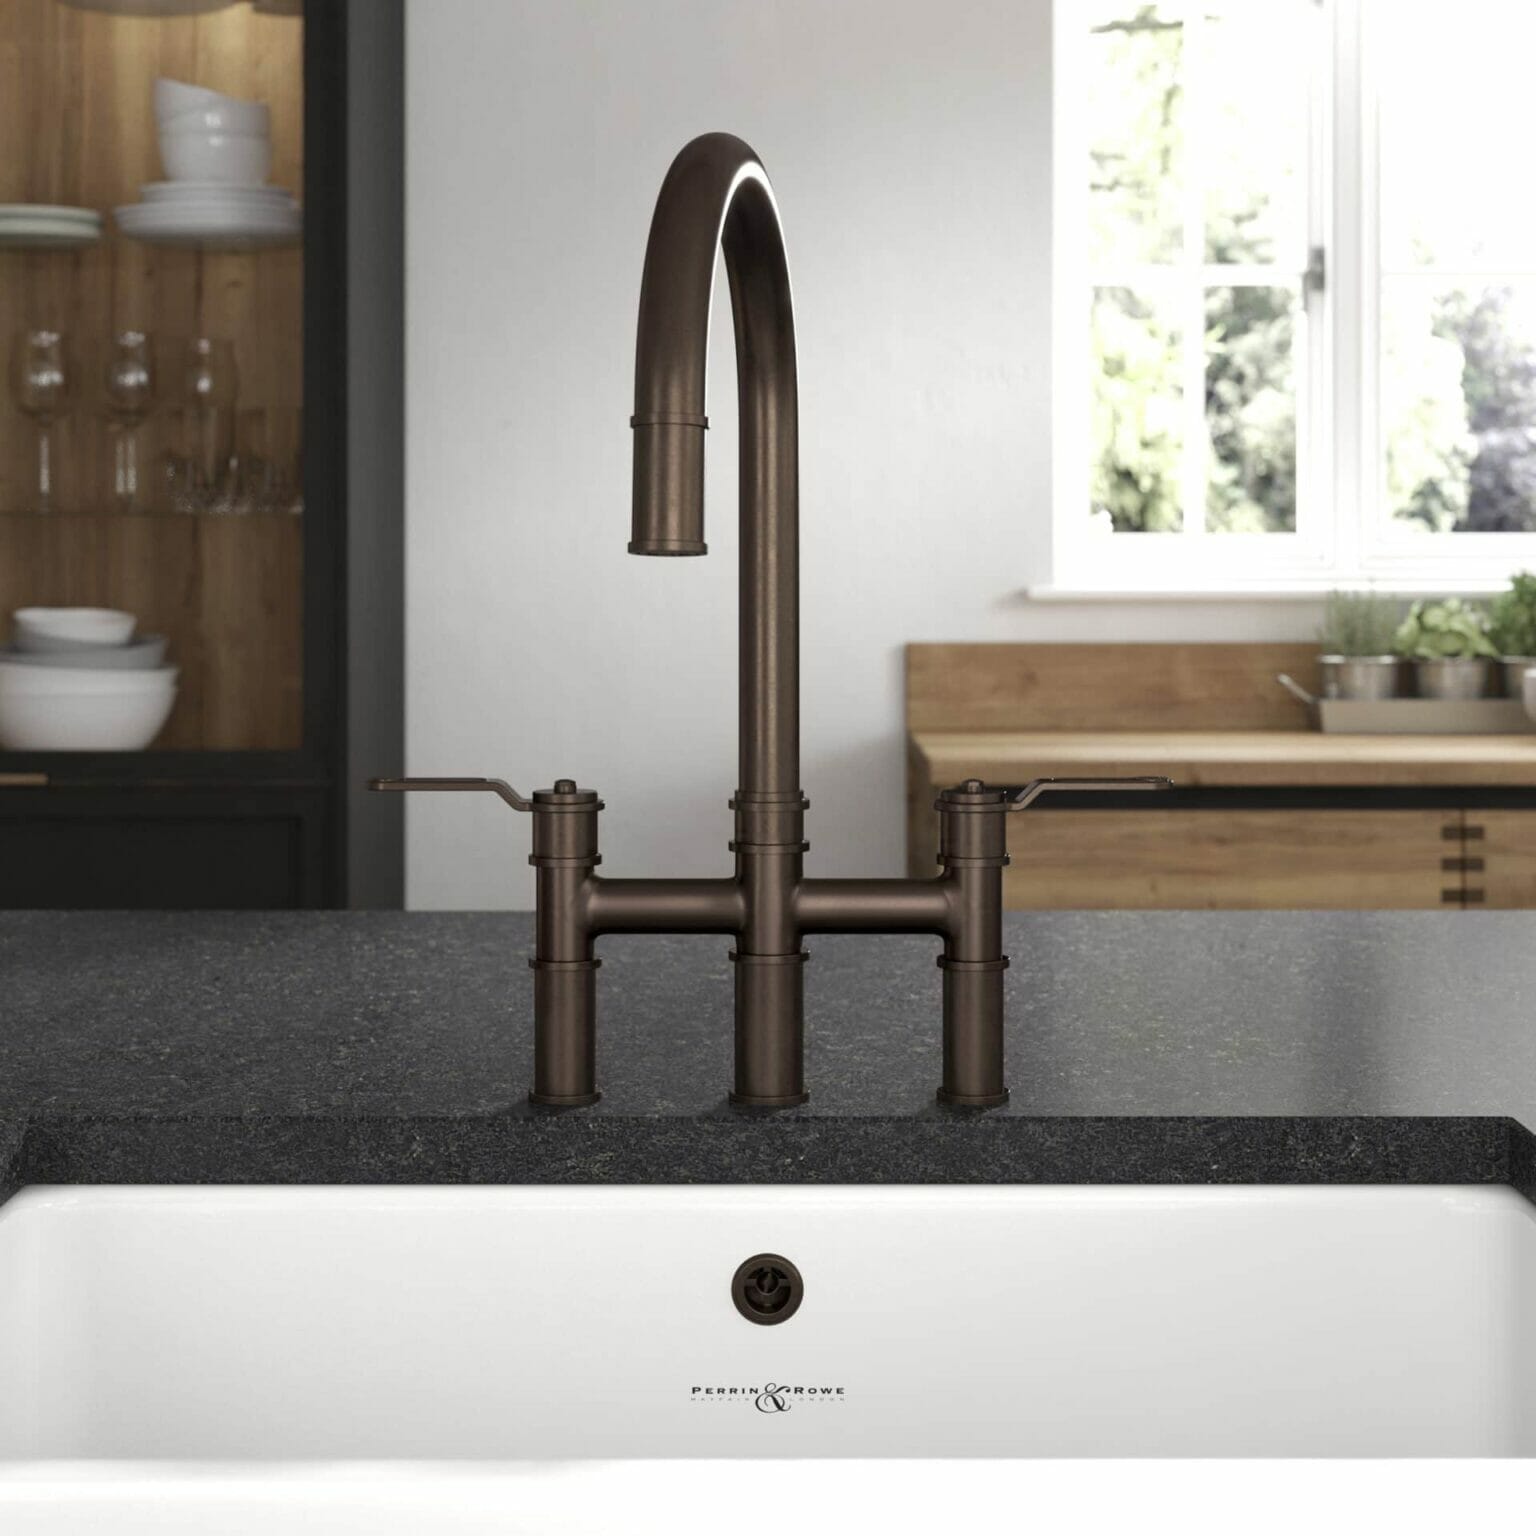 Armstrong Lever Mixer with Pull Down Rinse and Textured Lever in English Bronze, Perrin & Rowe